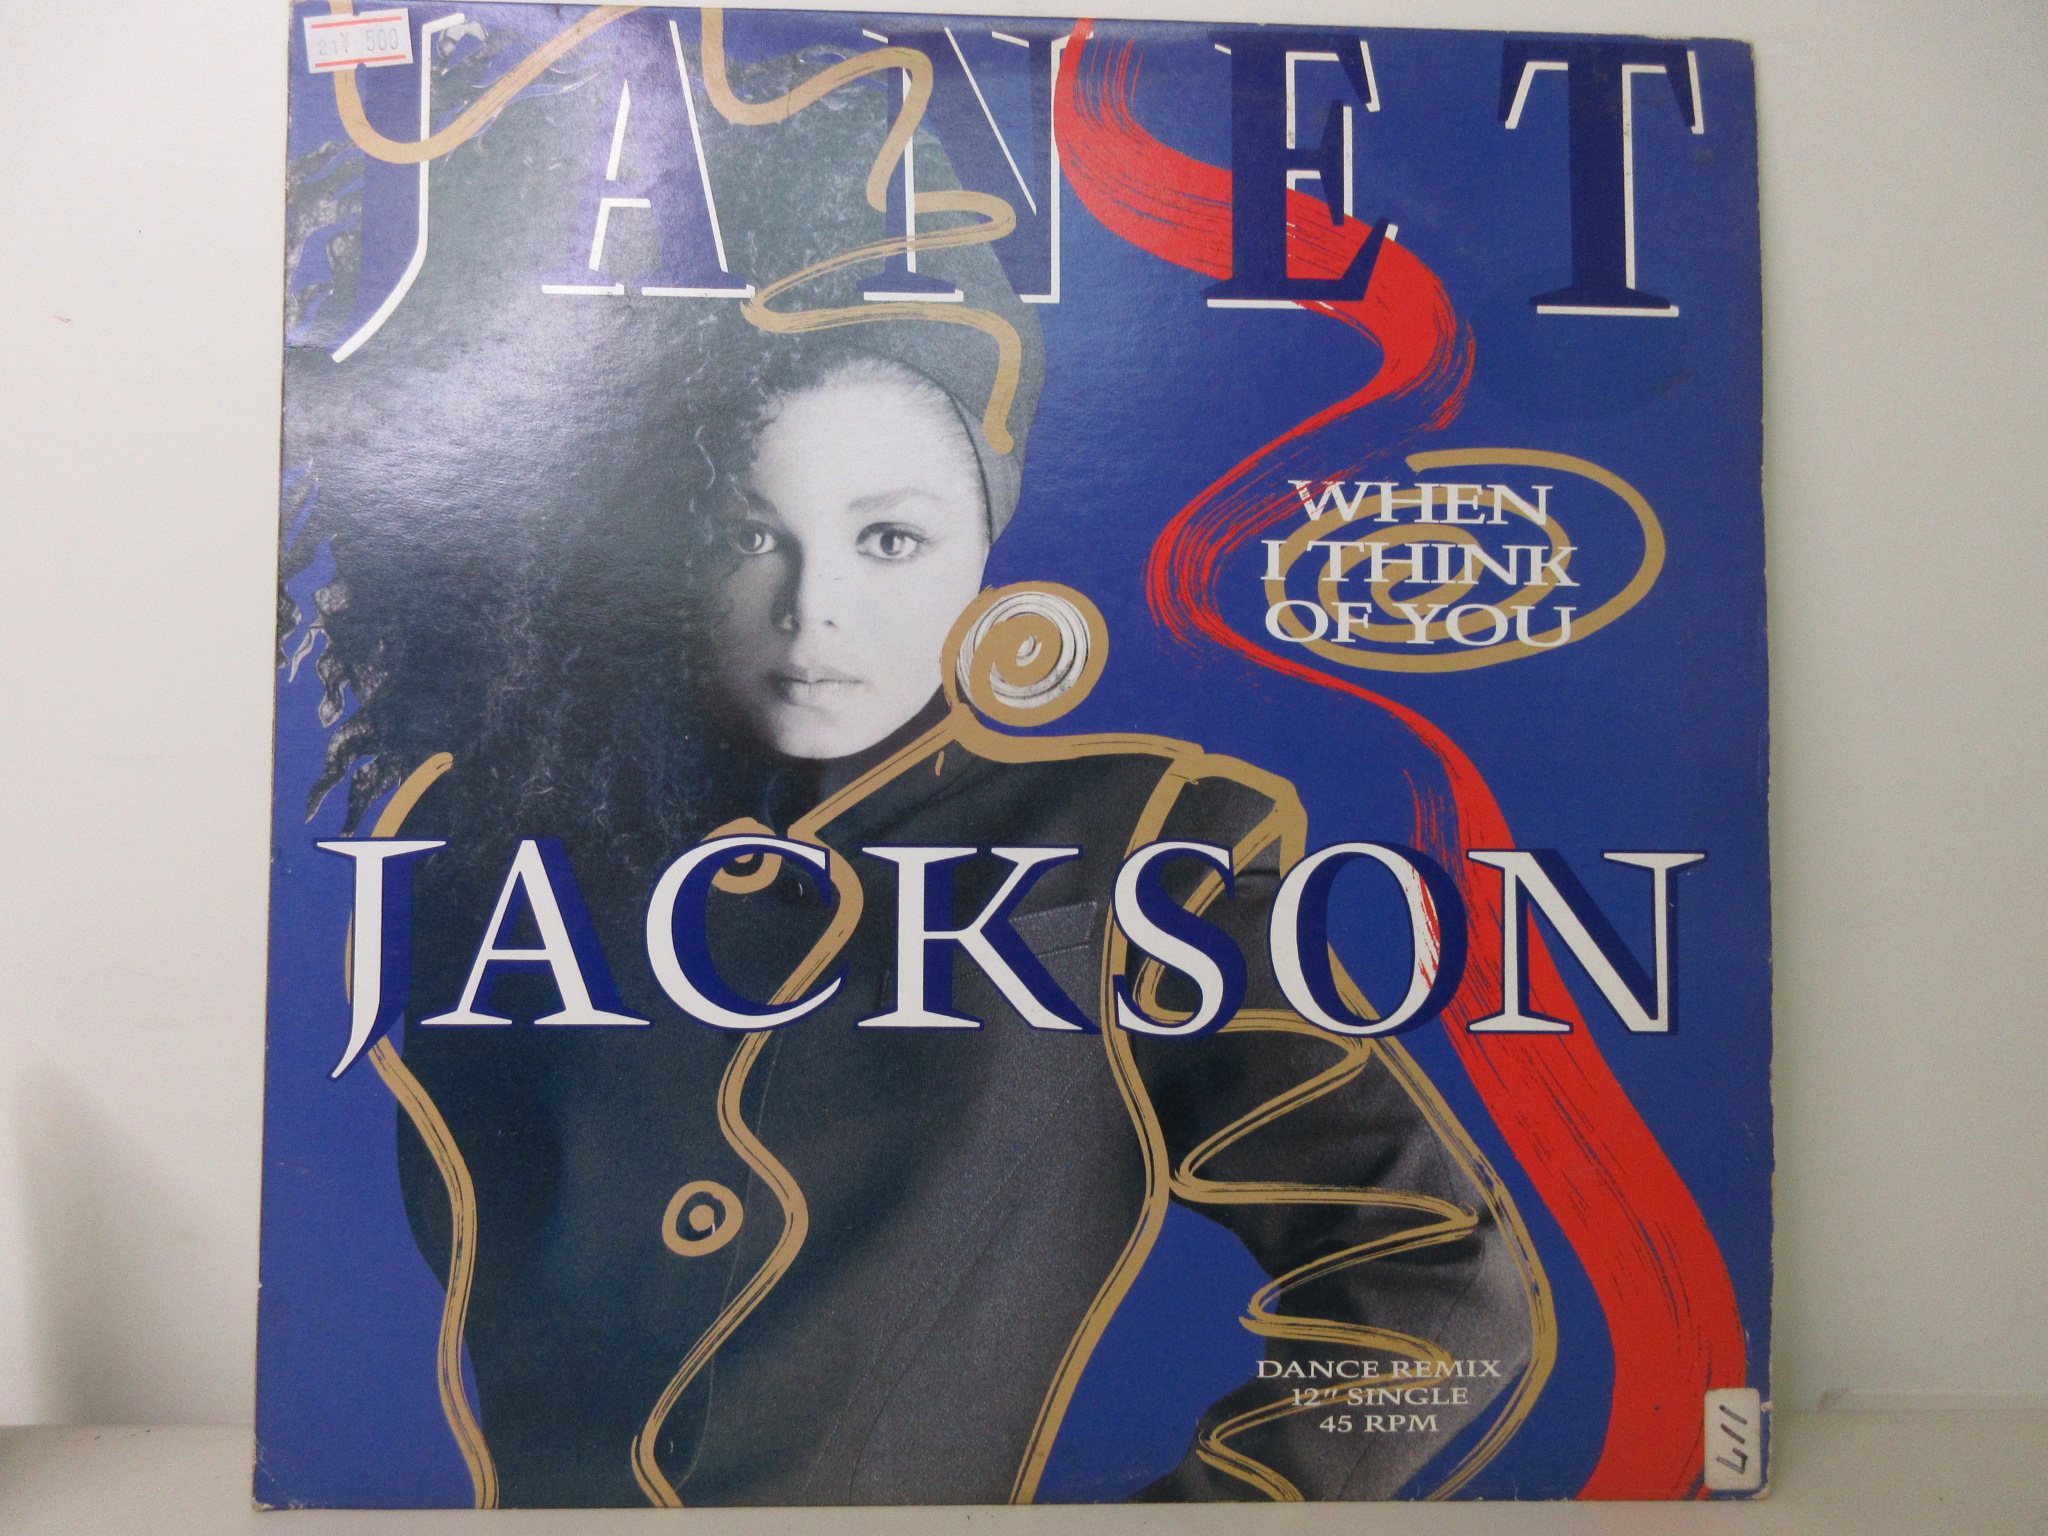 Janet Jackson - When I Think Of You (Dance Remix)　〔C12Y3081〕〔4988012330116〕